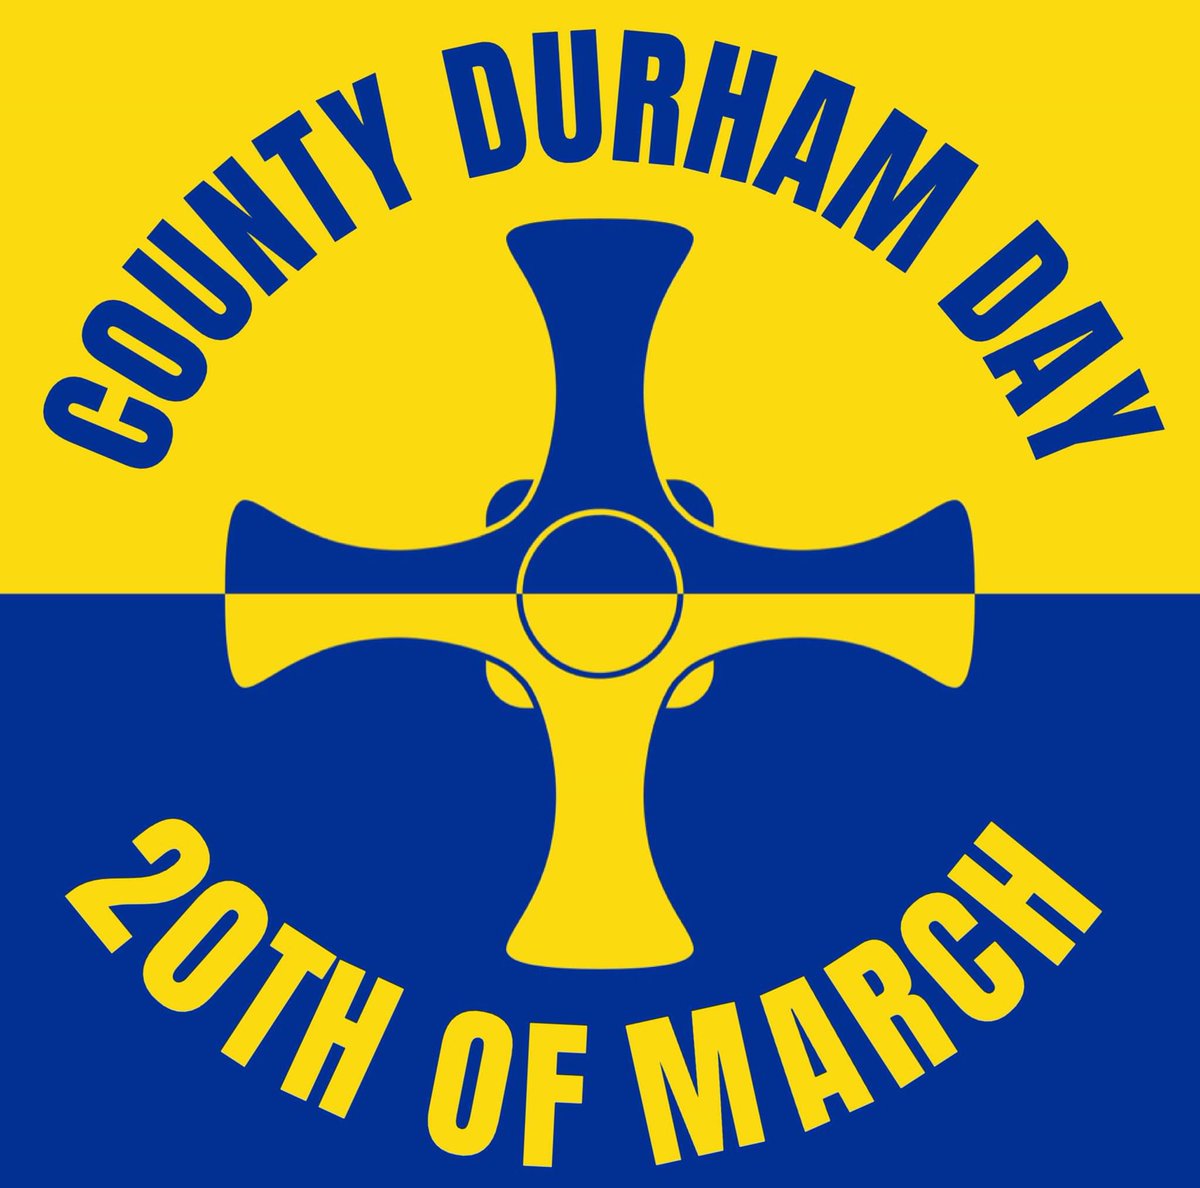 Today is #CountyDurhamDay!

Celebrated on the date of Saint Cuthbert’s death, whose famed pectoral cross features on the #CountyDurham flag.

Cuthbert was born in Dunbar in about 635AD, the year that the monastery on Lindesfarne was founded.

🇬🇧 #HistoricCounties | #CountyDays 🏴󠁧󠁢󠁥󠁮󠁧󠁿